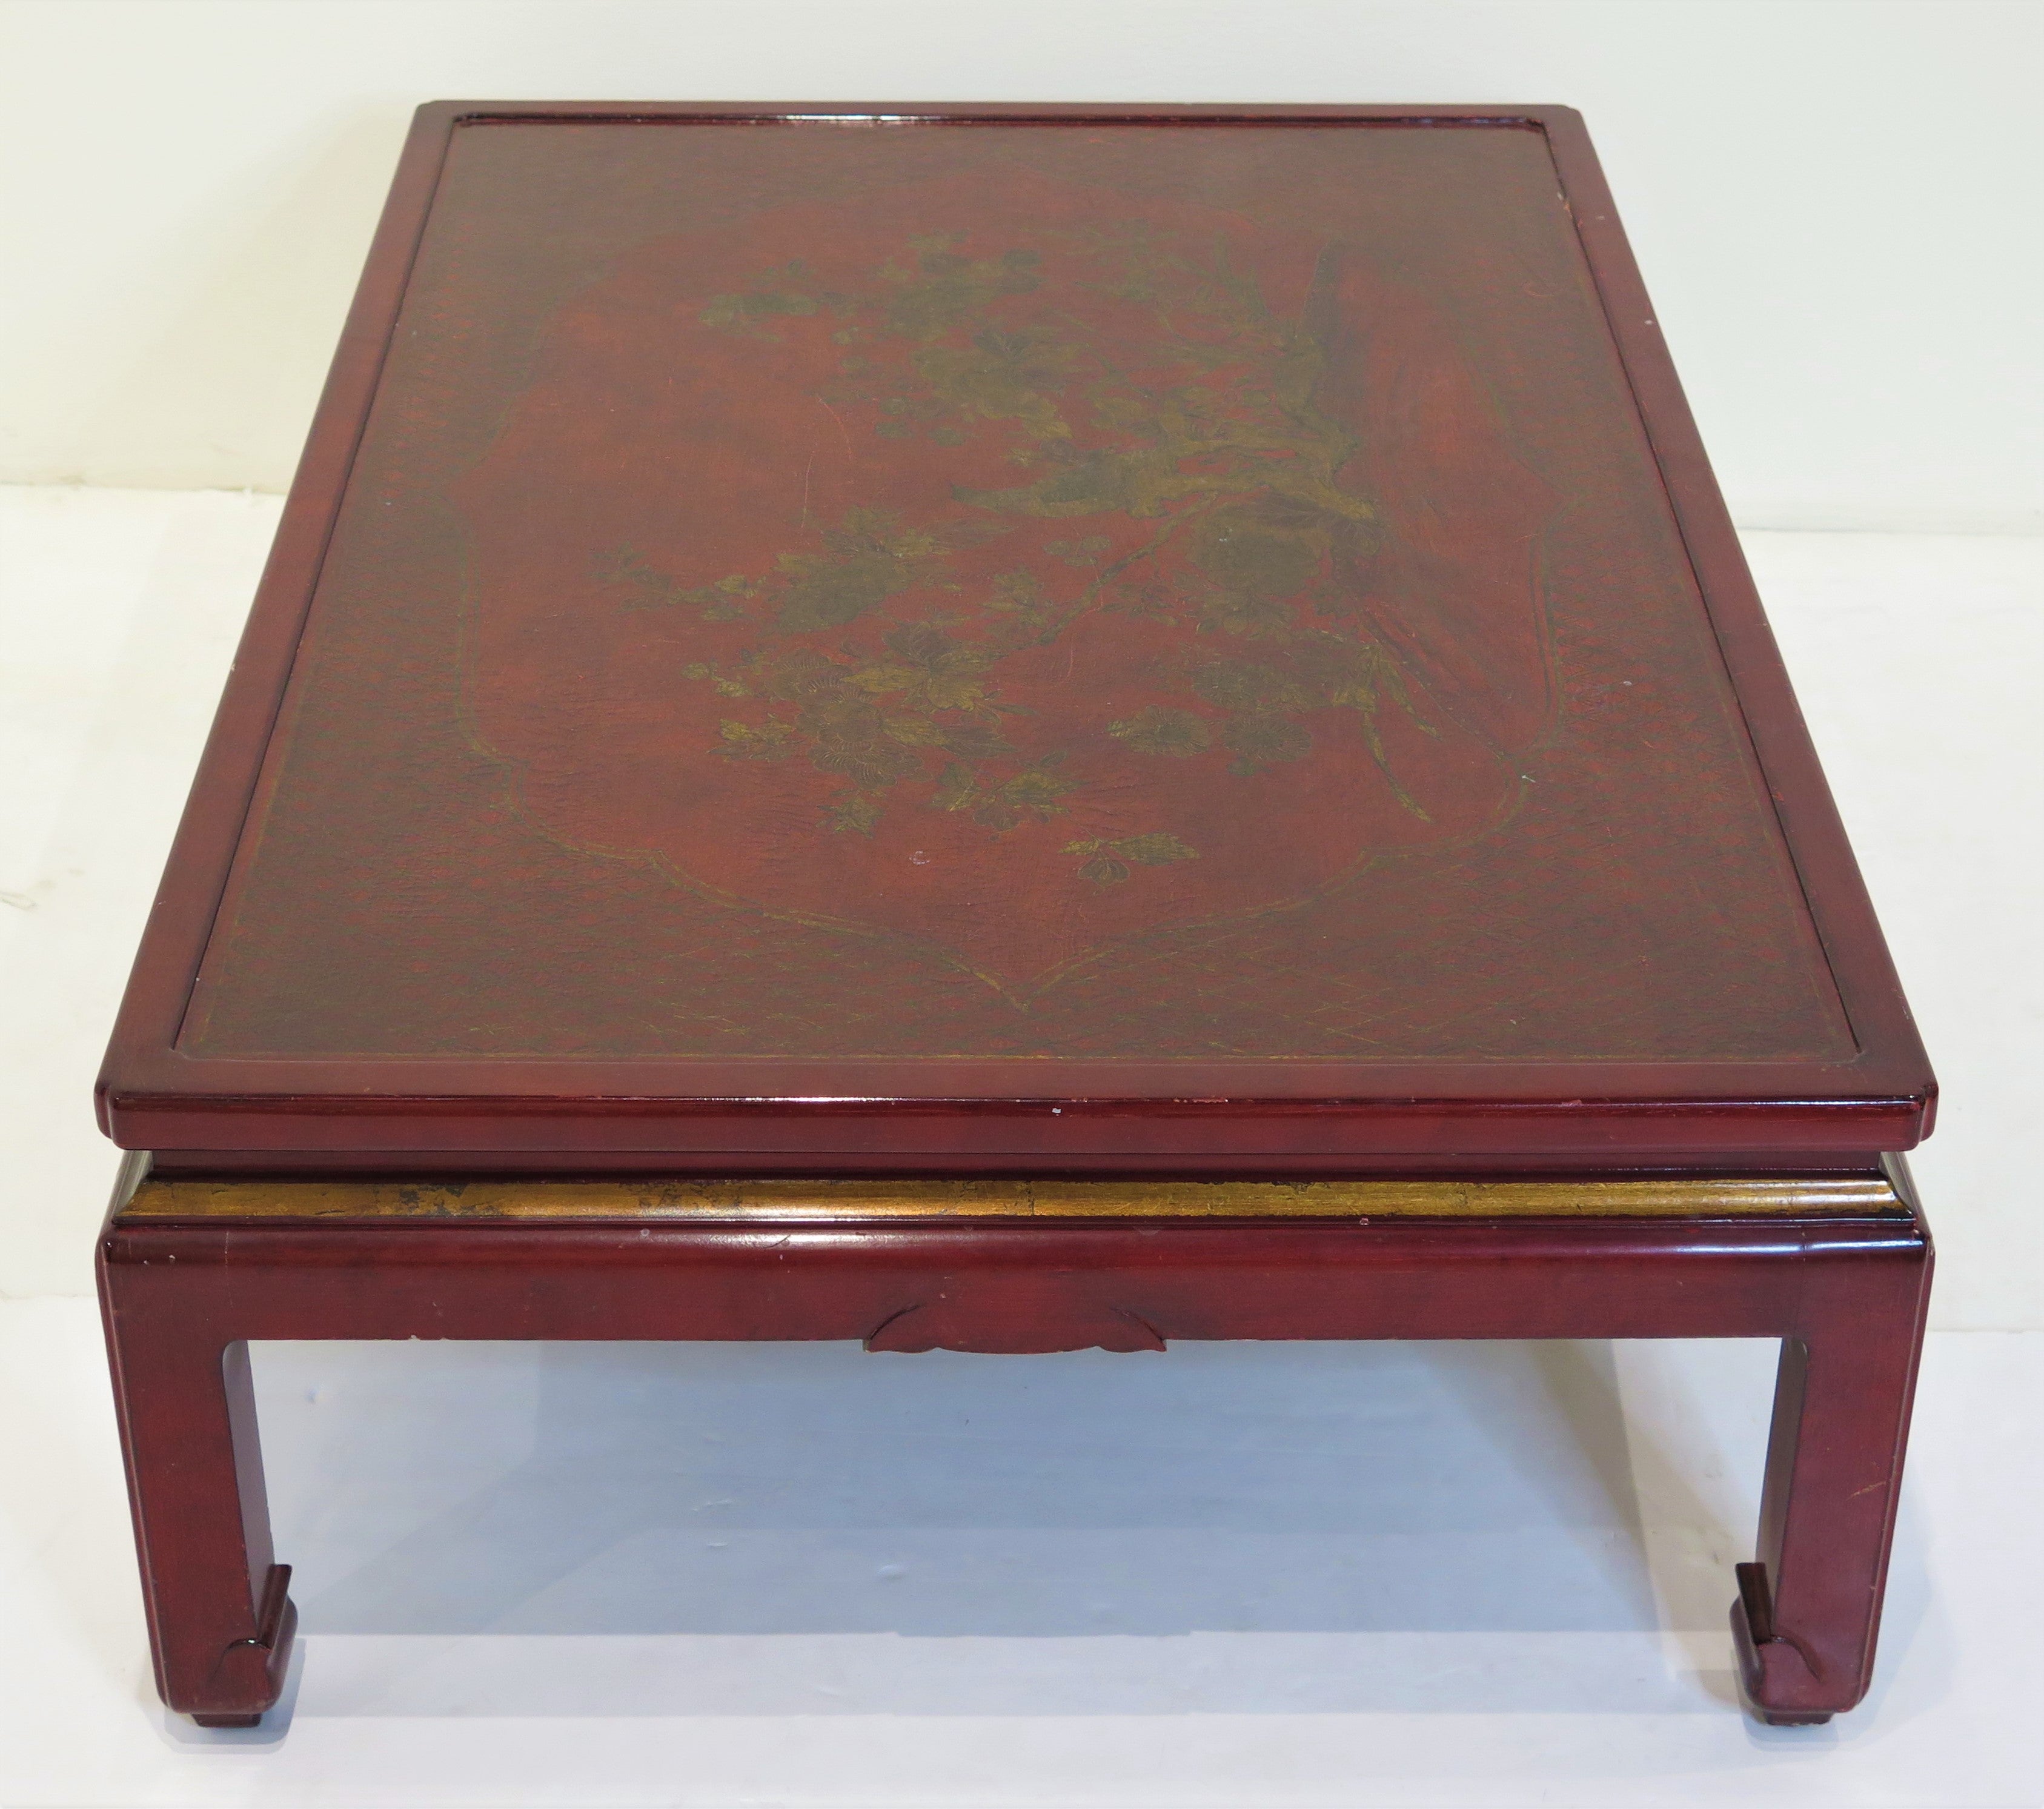 Red Lacquerware Cocktail Table by Atelier Midavaine, Paris